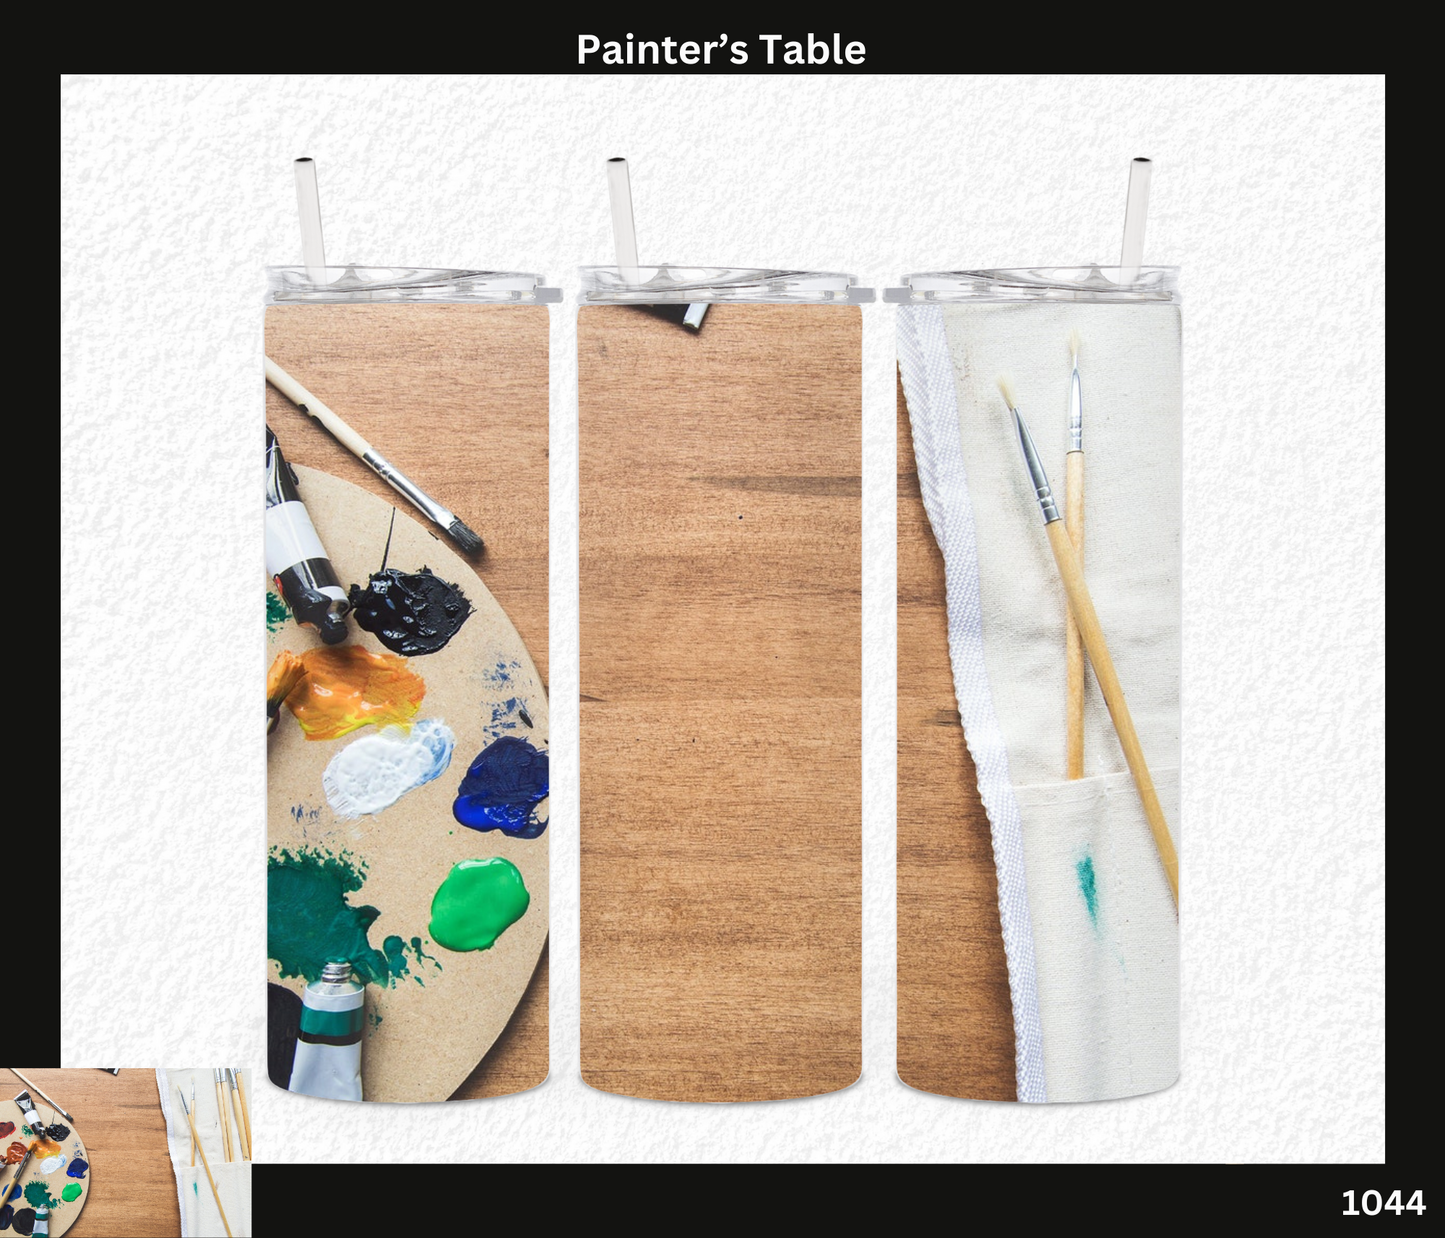 Painter’s Table